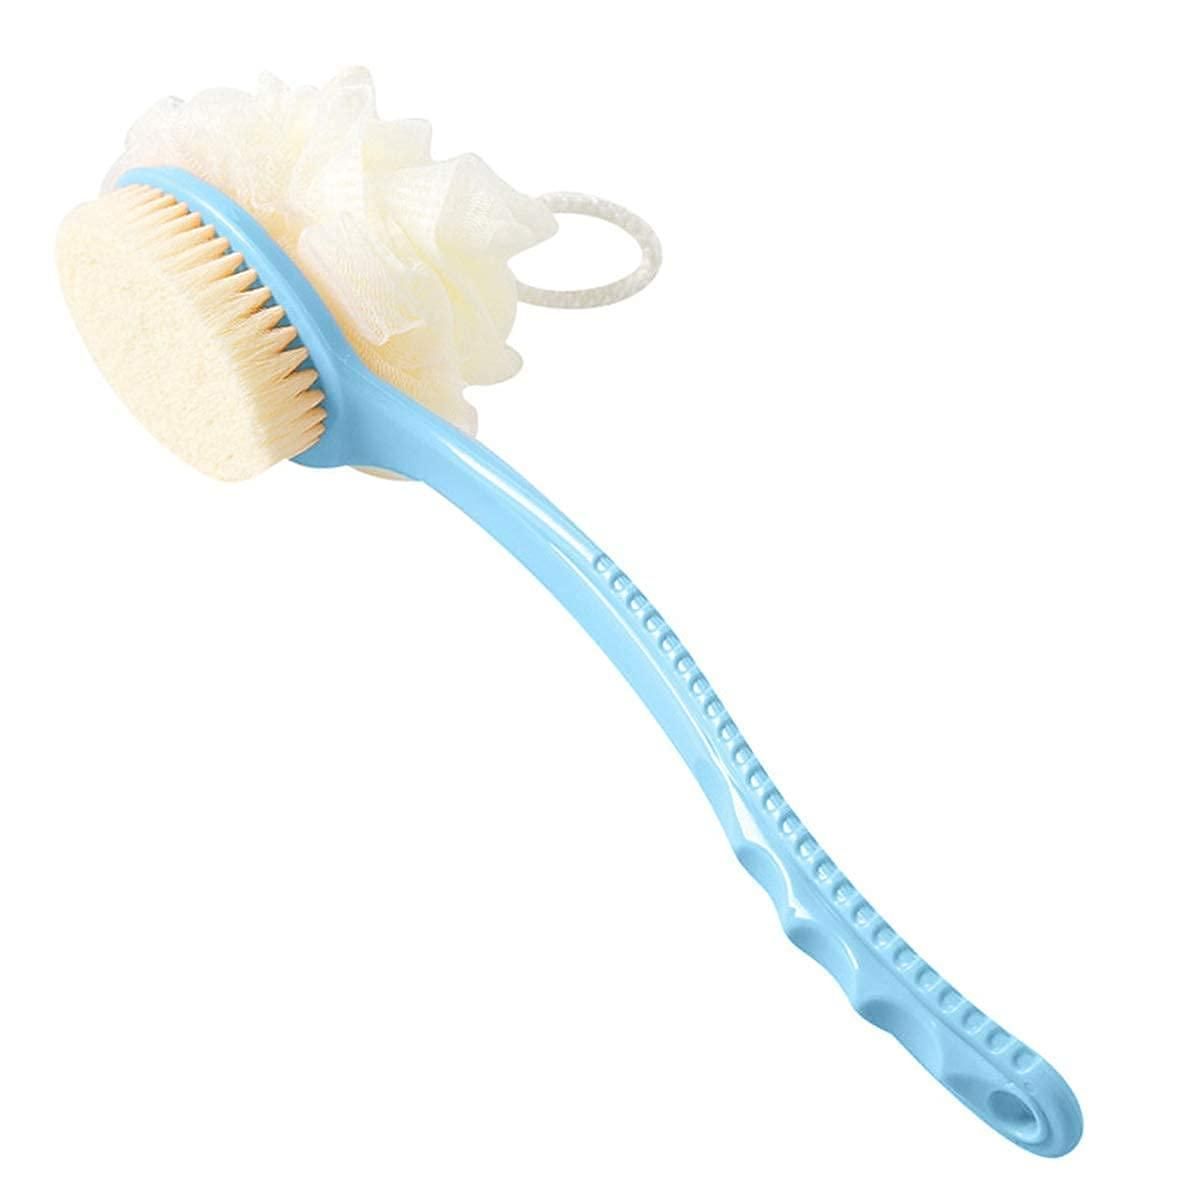 Arcreactor Zone 2 IN 1 loofah with handle, Bath Brush, back scrubber, Bath Brush with Soft Comfortable Bristles And Loofah with handle, Double Sided Bath Brush Scrubber for bathing(Pack of 2)